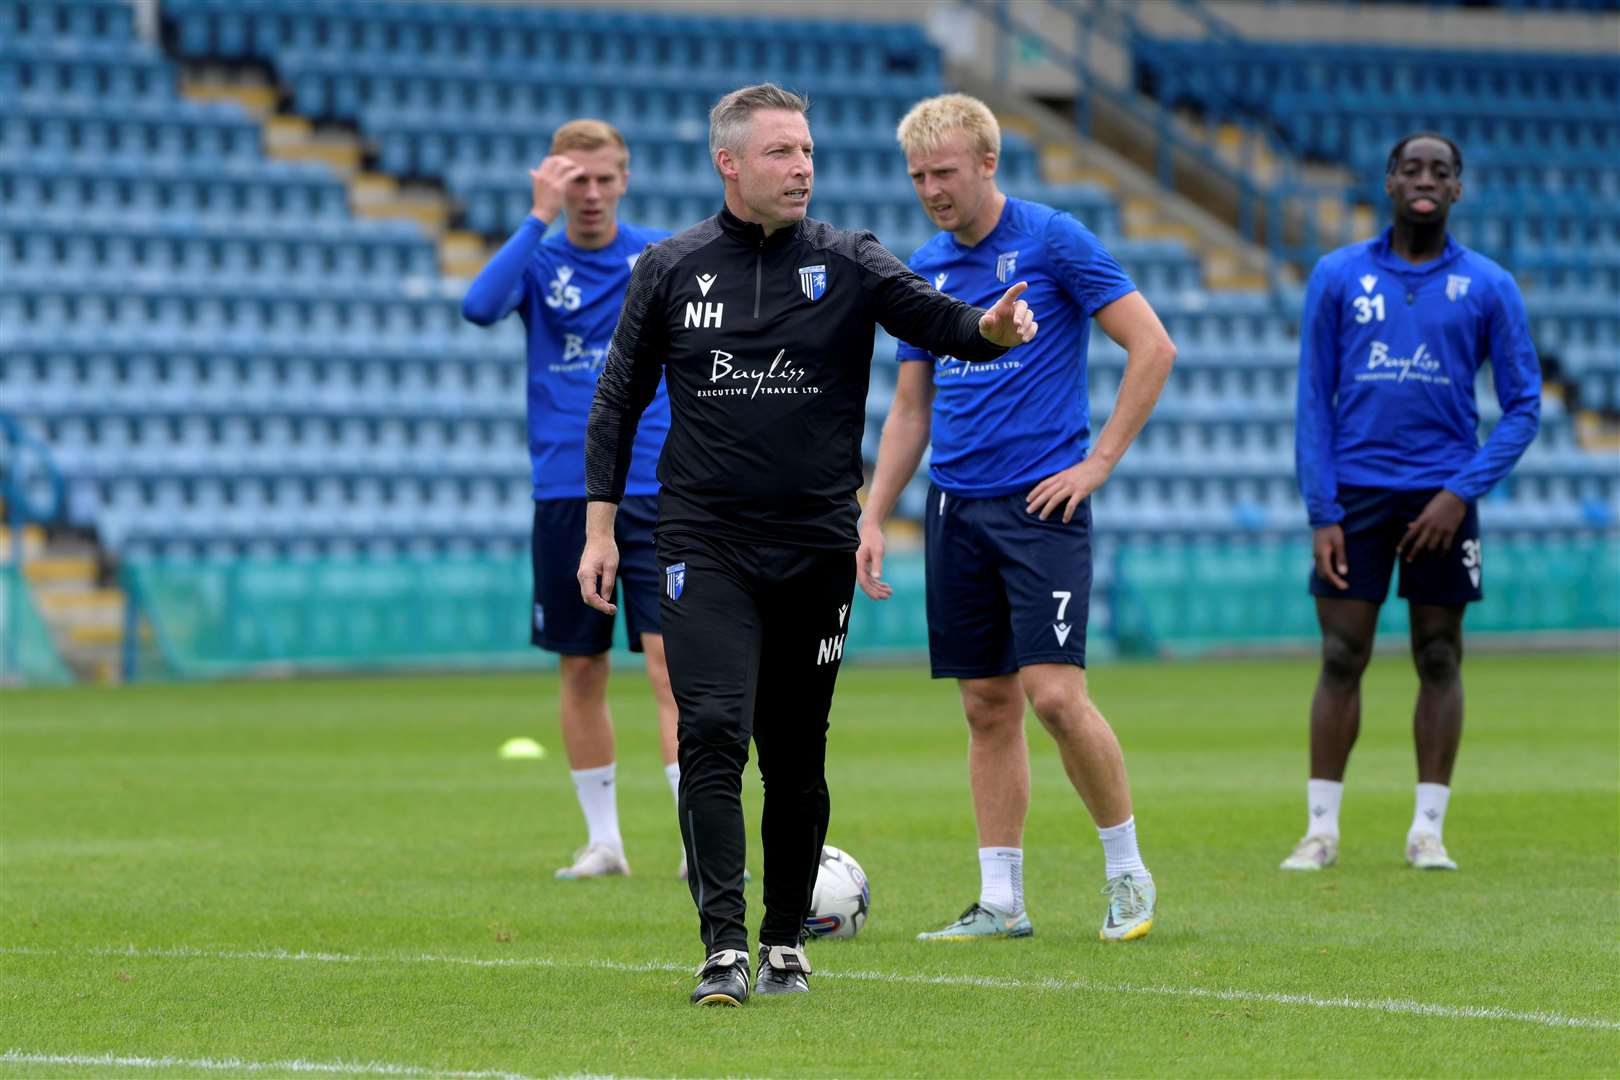 Manager Neil Harris opens the training session Picture: Barry Goodwin